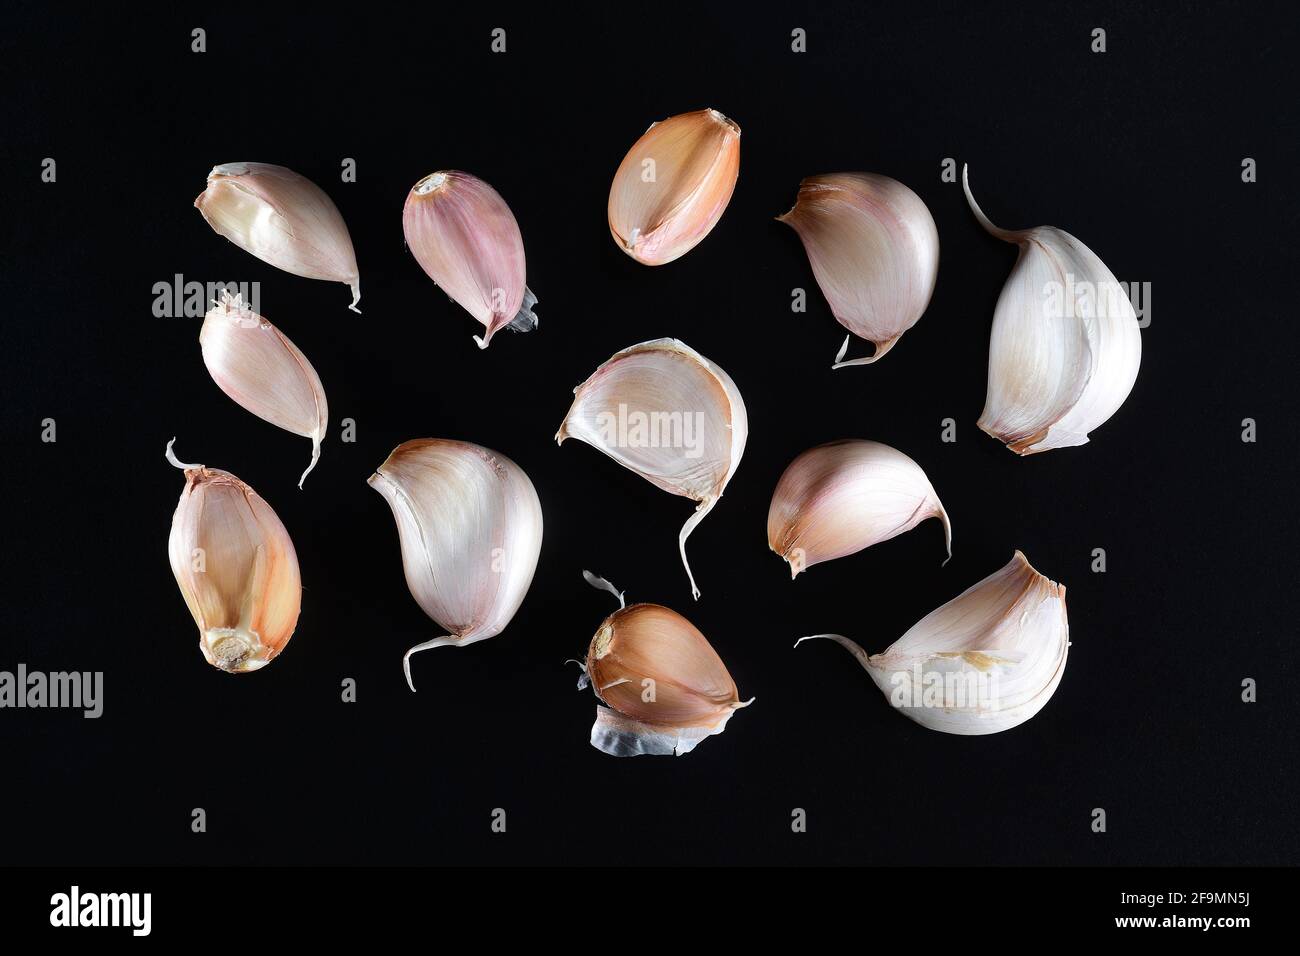 Image of garlic cloves studio isolated on dark background, view above Stock Photo